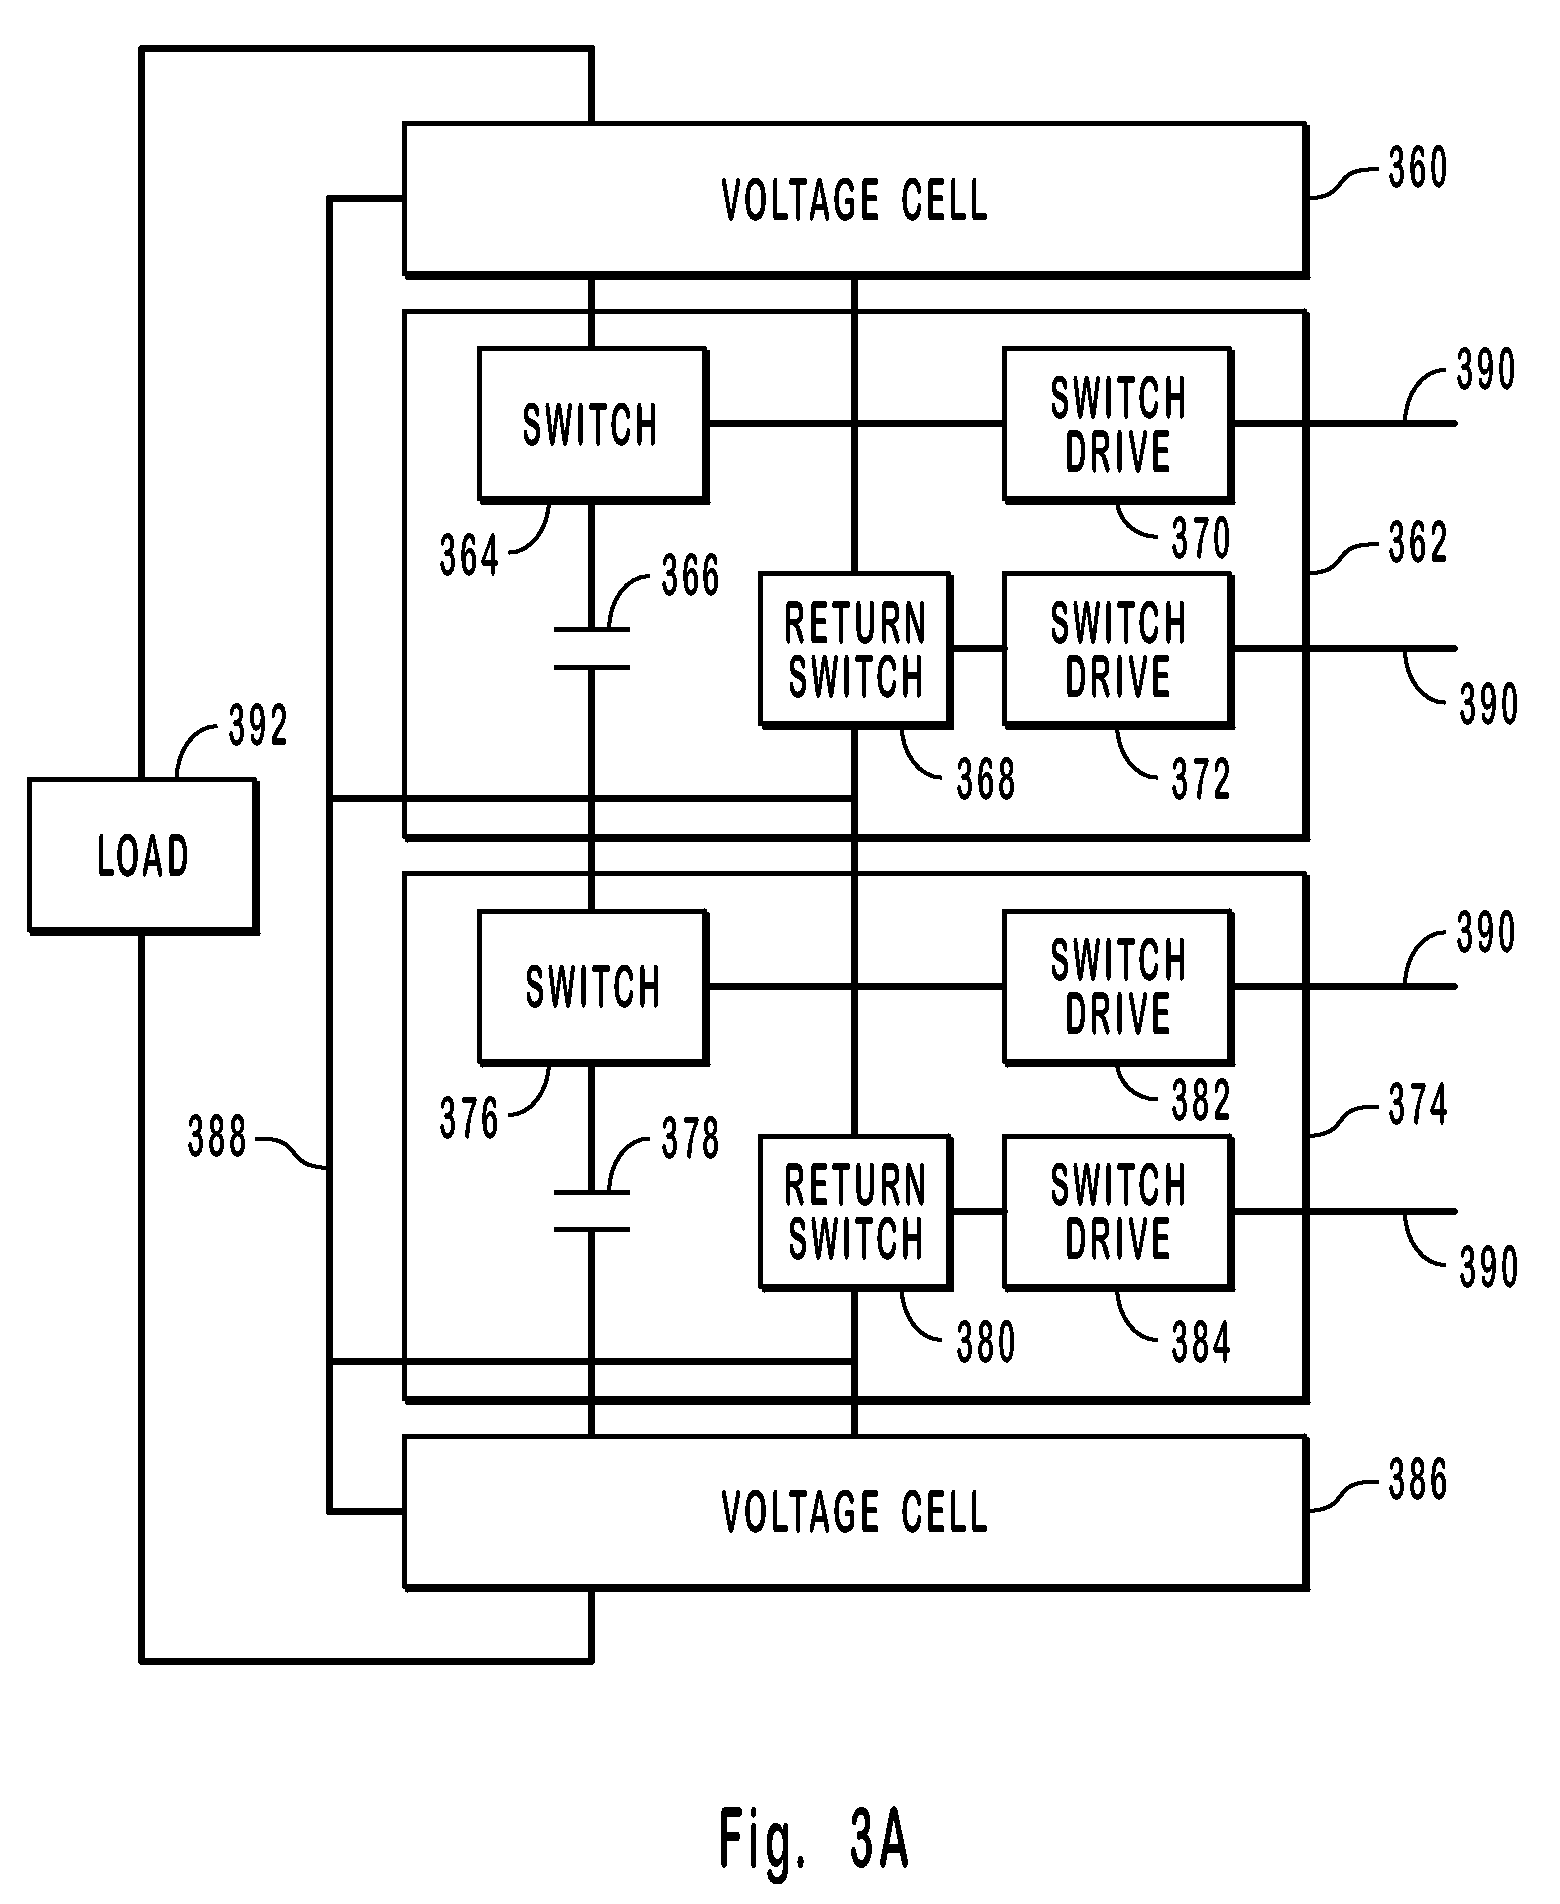 High voltage pulsed power supply using solid state switches with voltage cell isolation